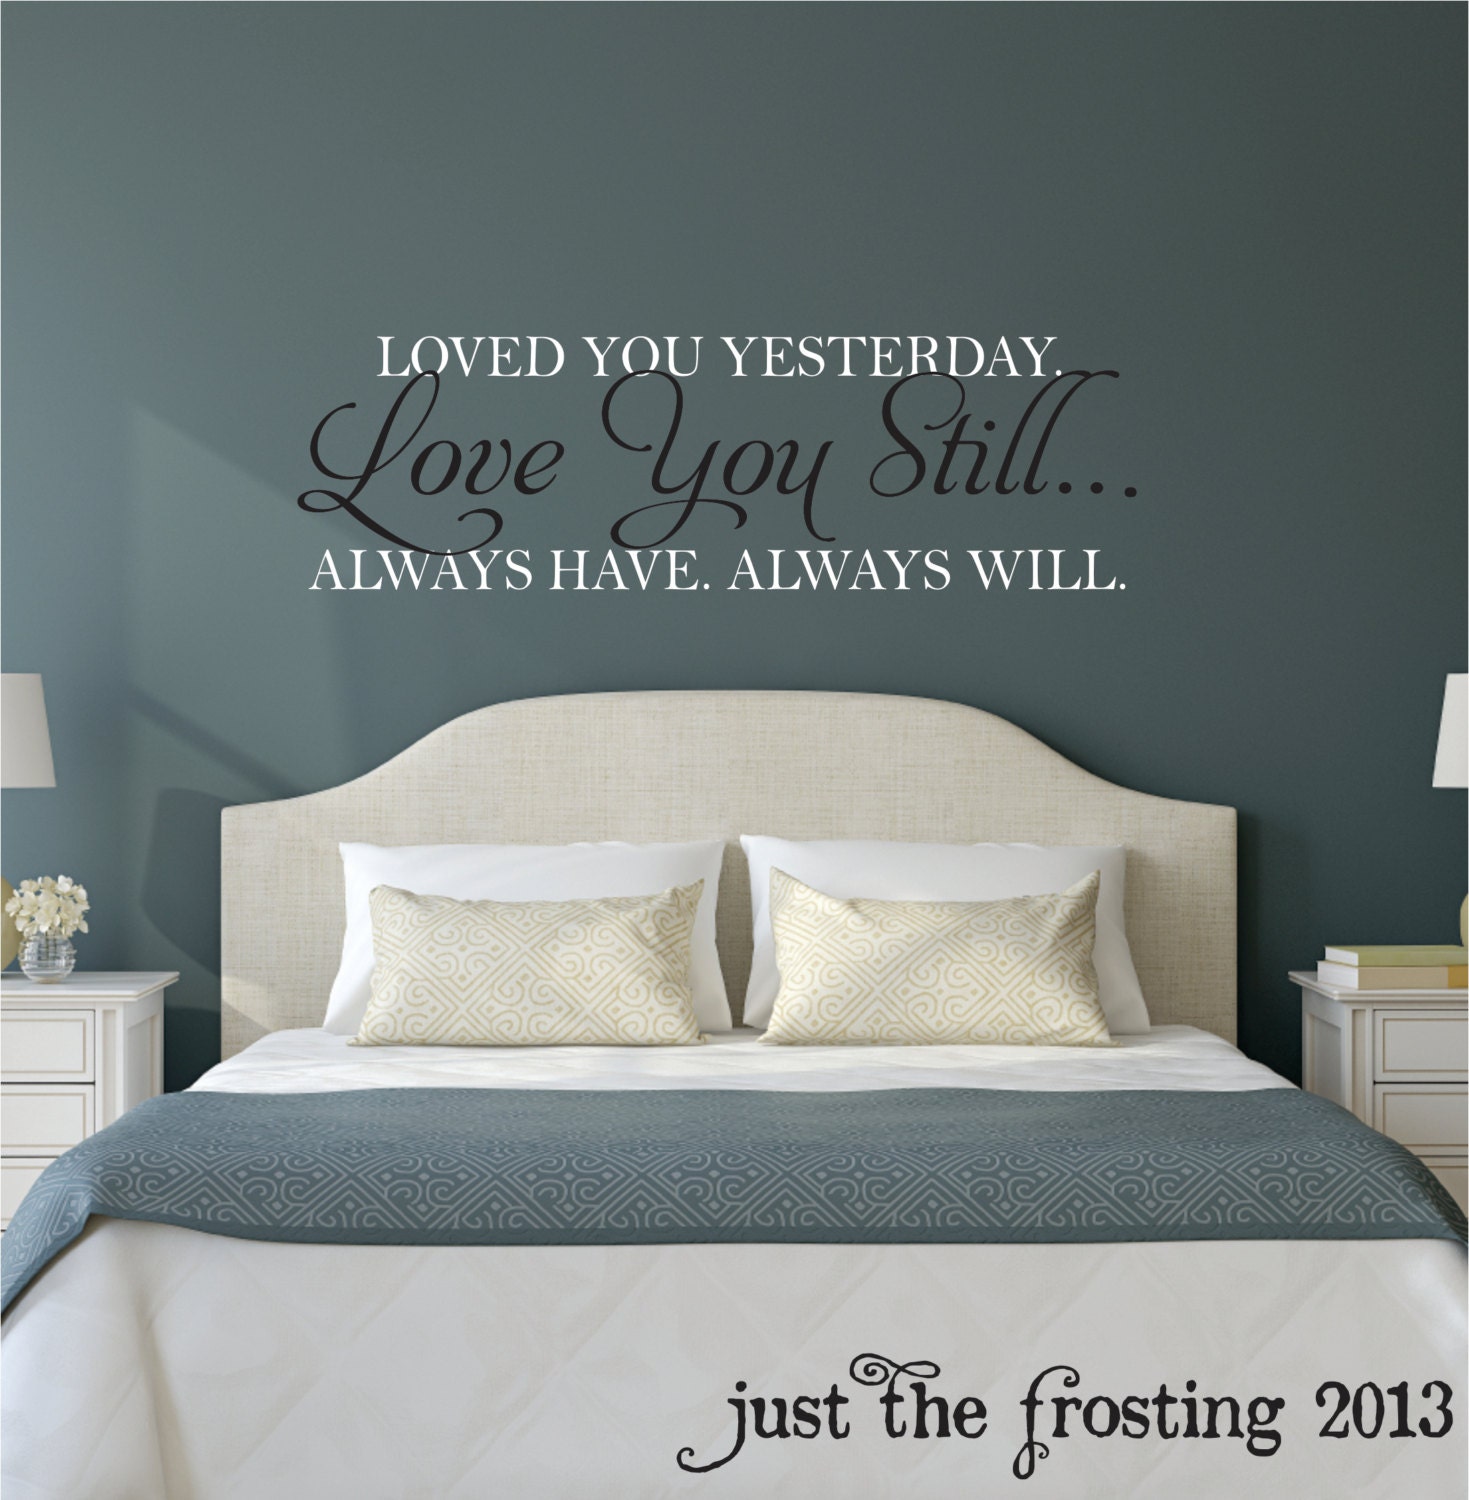 Love You Still Master Bedroom Wall Decal Vinyl Wall Quote